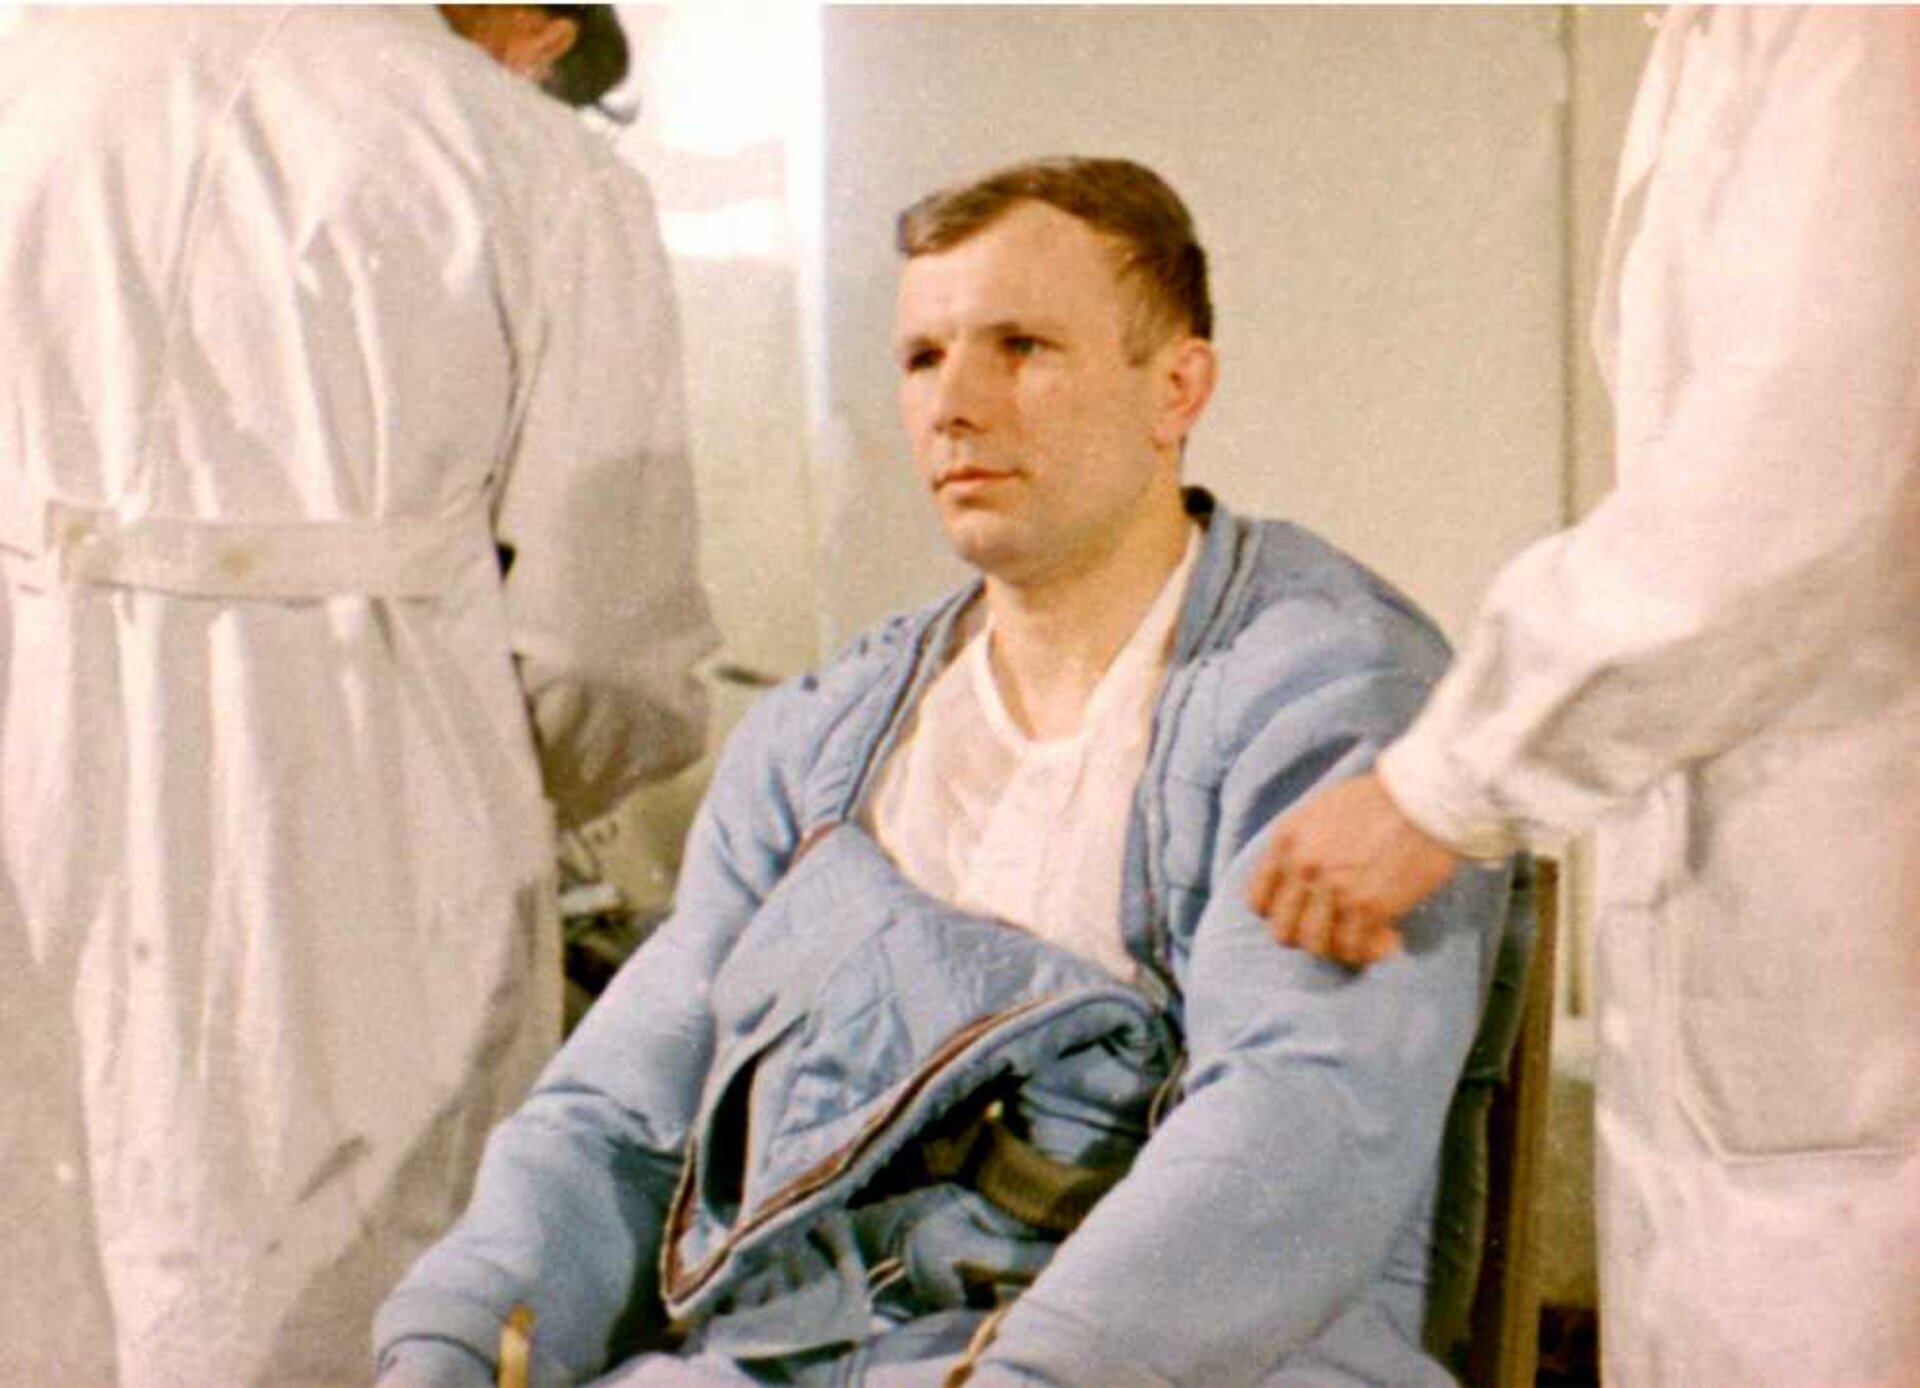 Gagarin is helped in suiting up